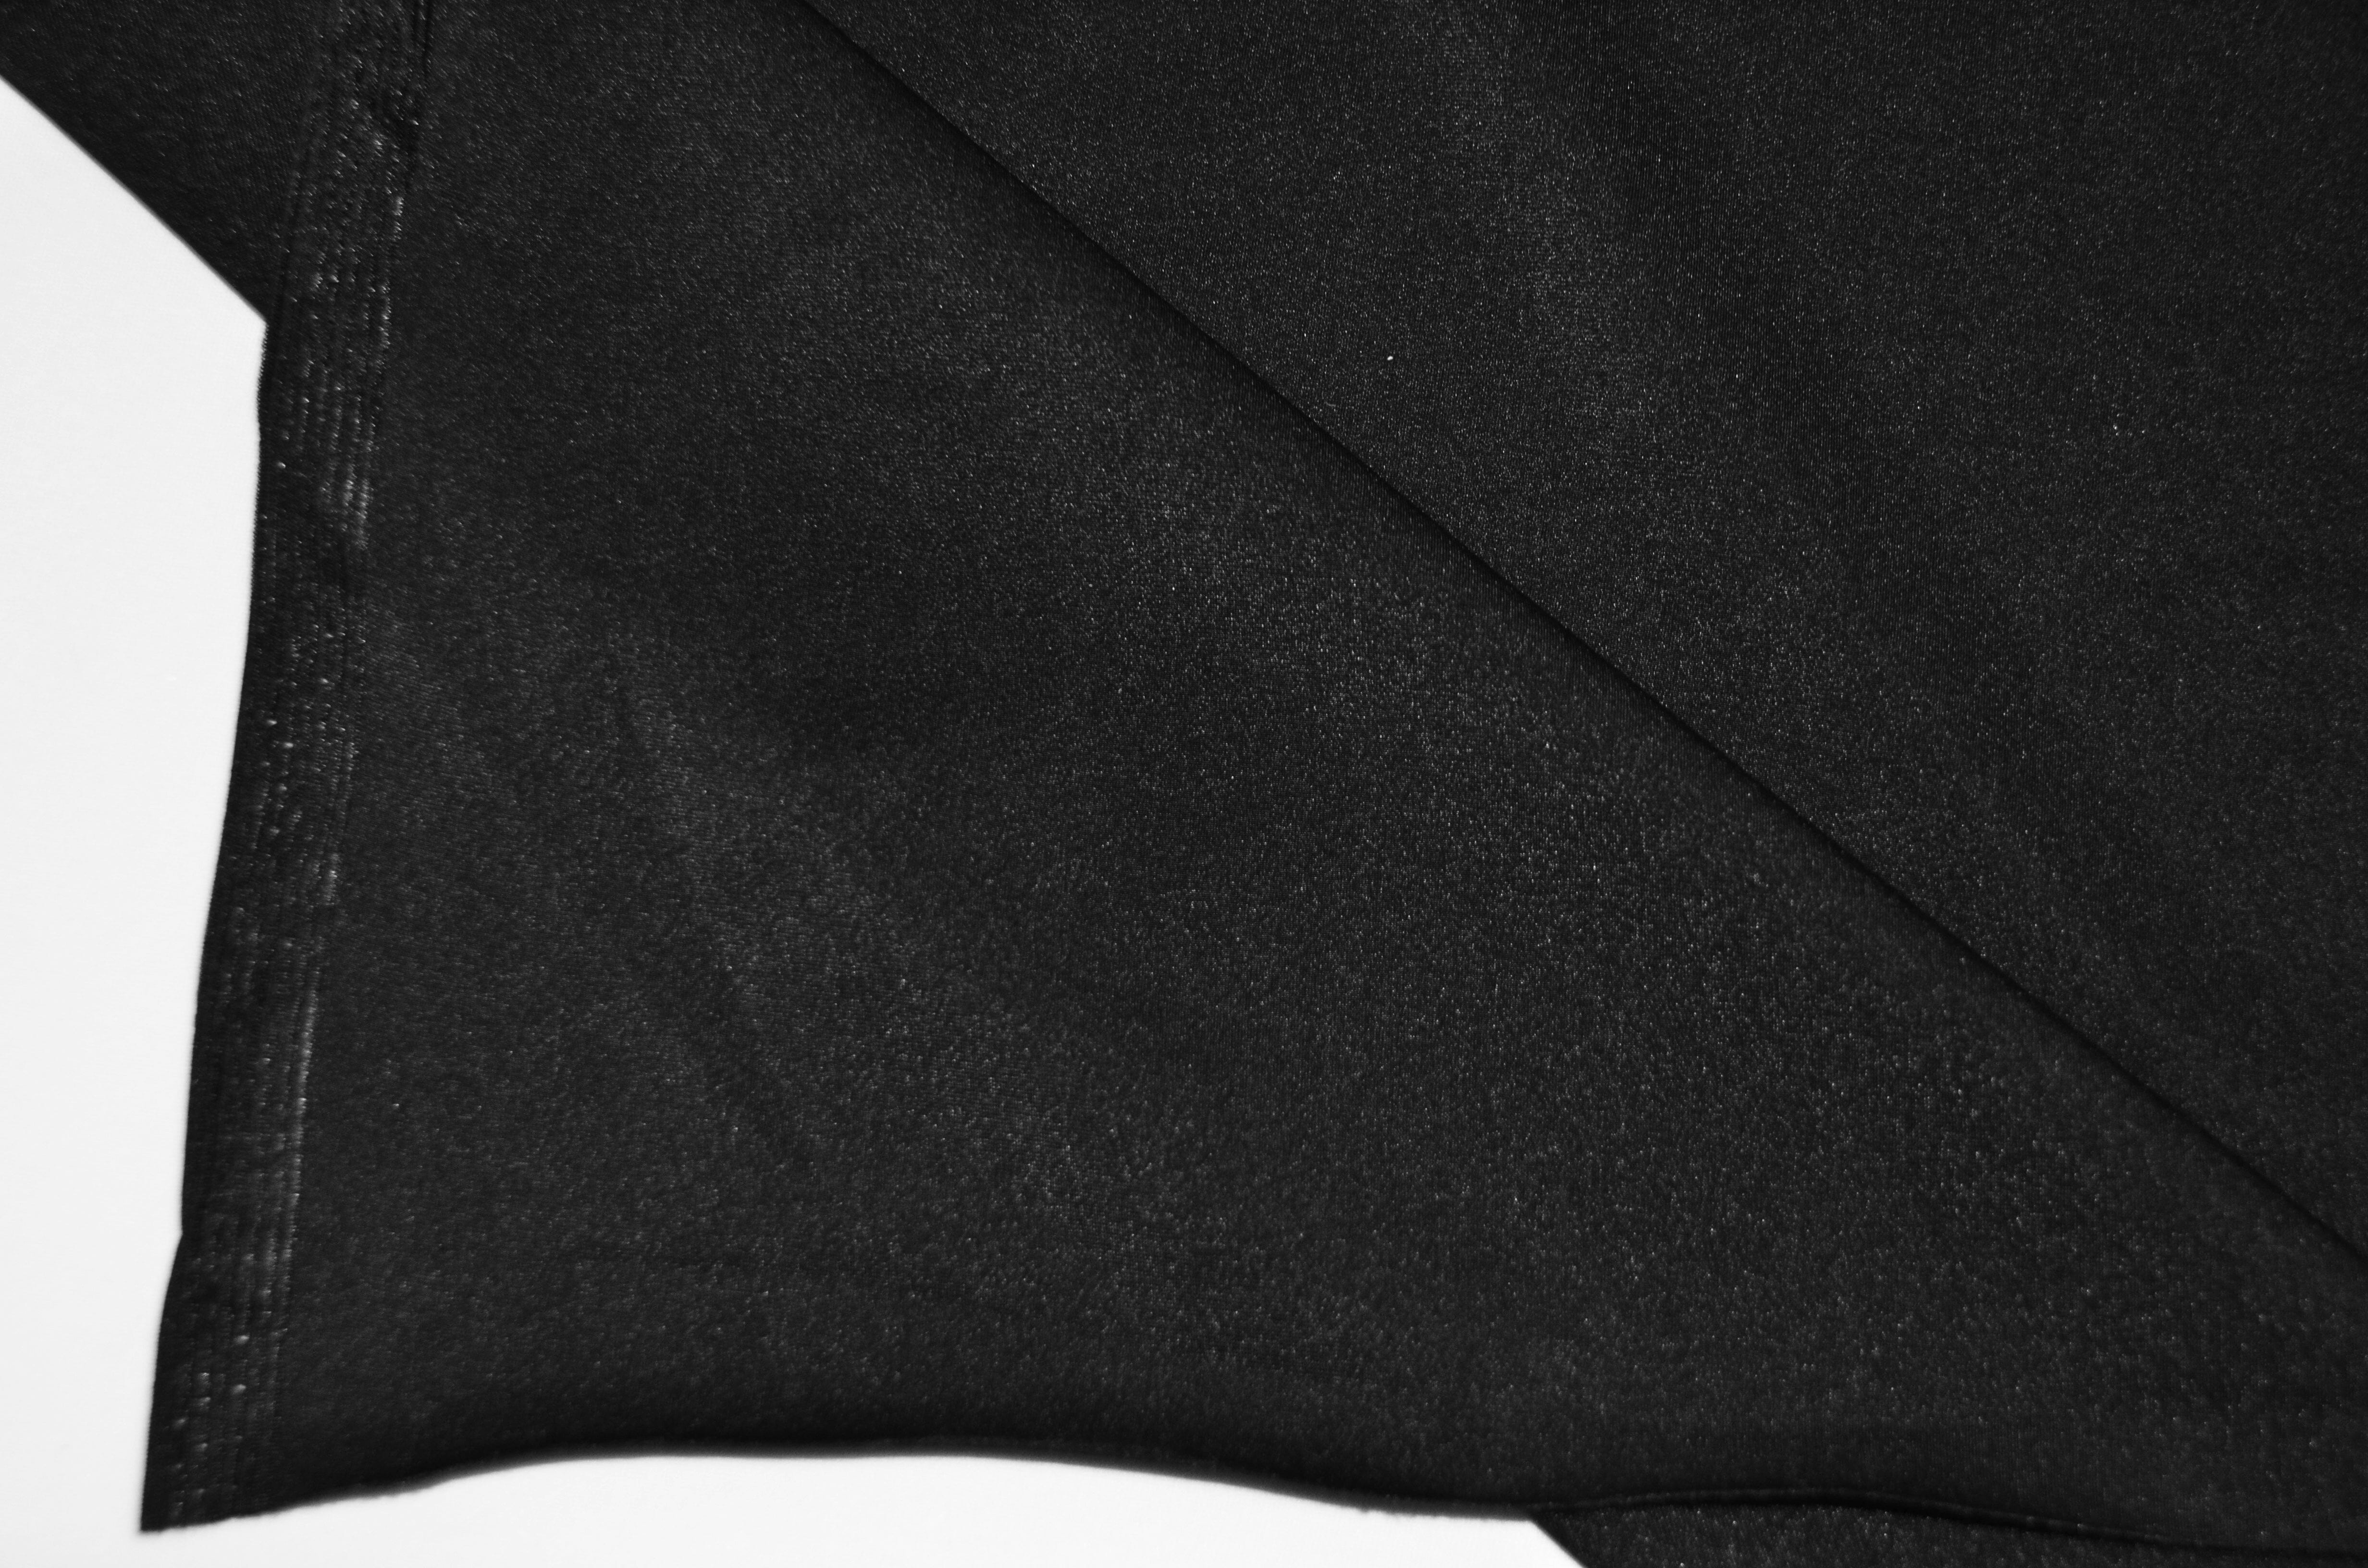 Yoga Spandex Fabric | 60" Wide | Active Wear and Sportswear Fabric | Poly Spandex for Digital Printing | Slight Sheen 4 Way Stretch Knit | White and Black Color | Fabric mytextilefabric 